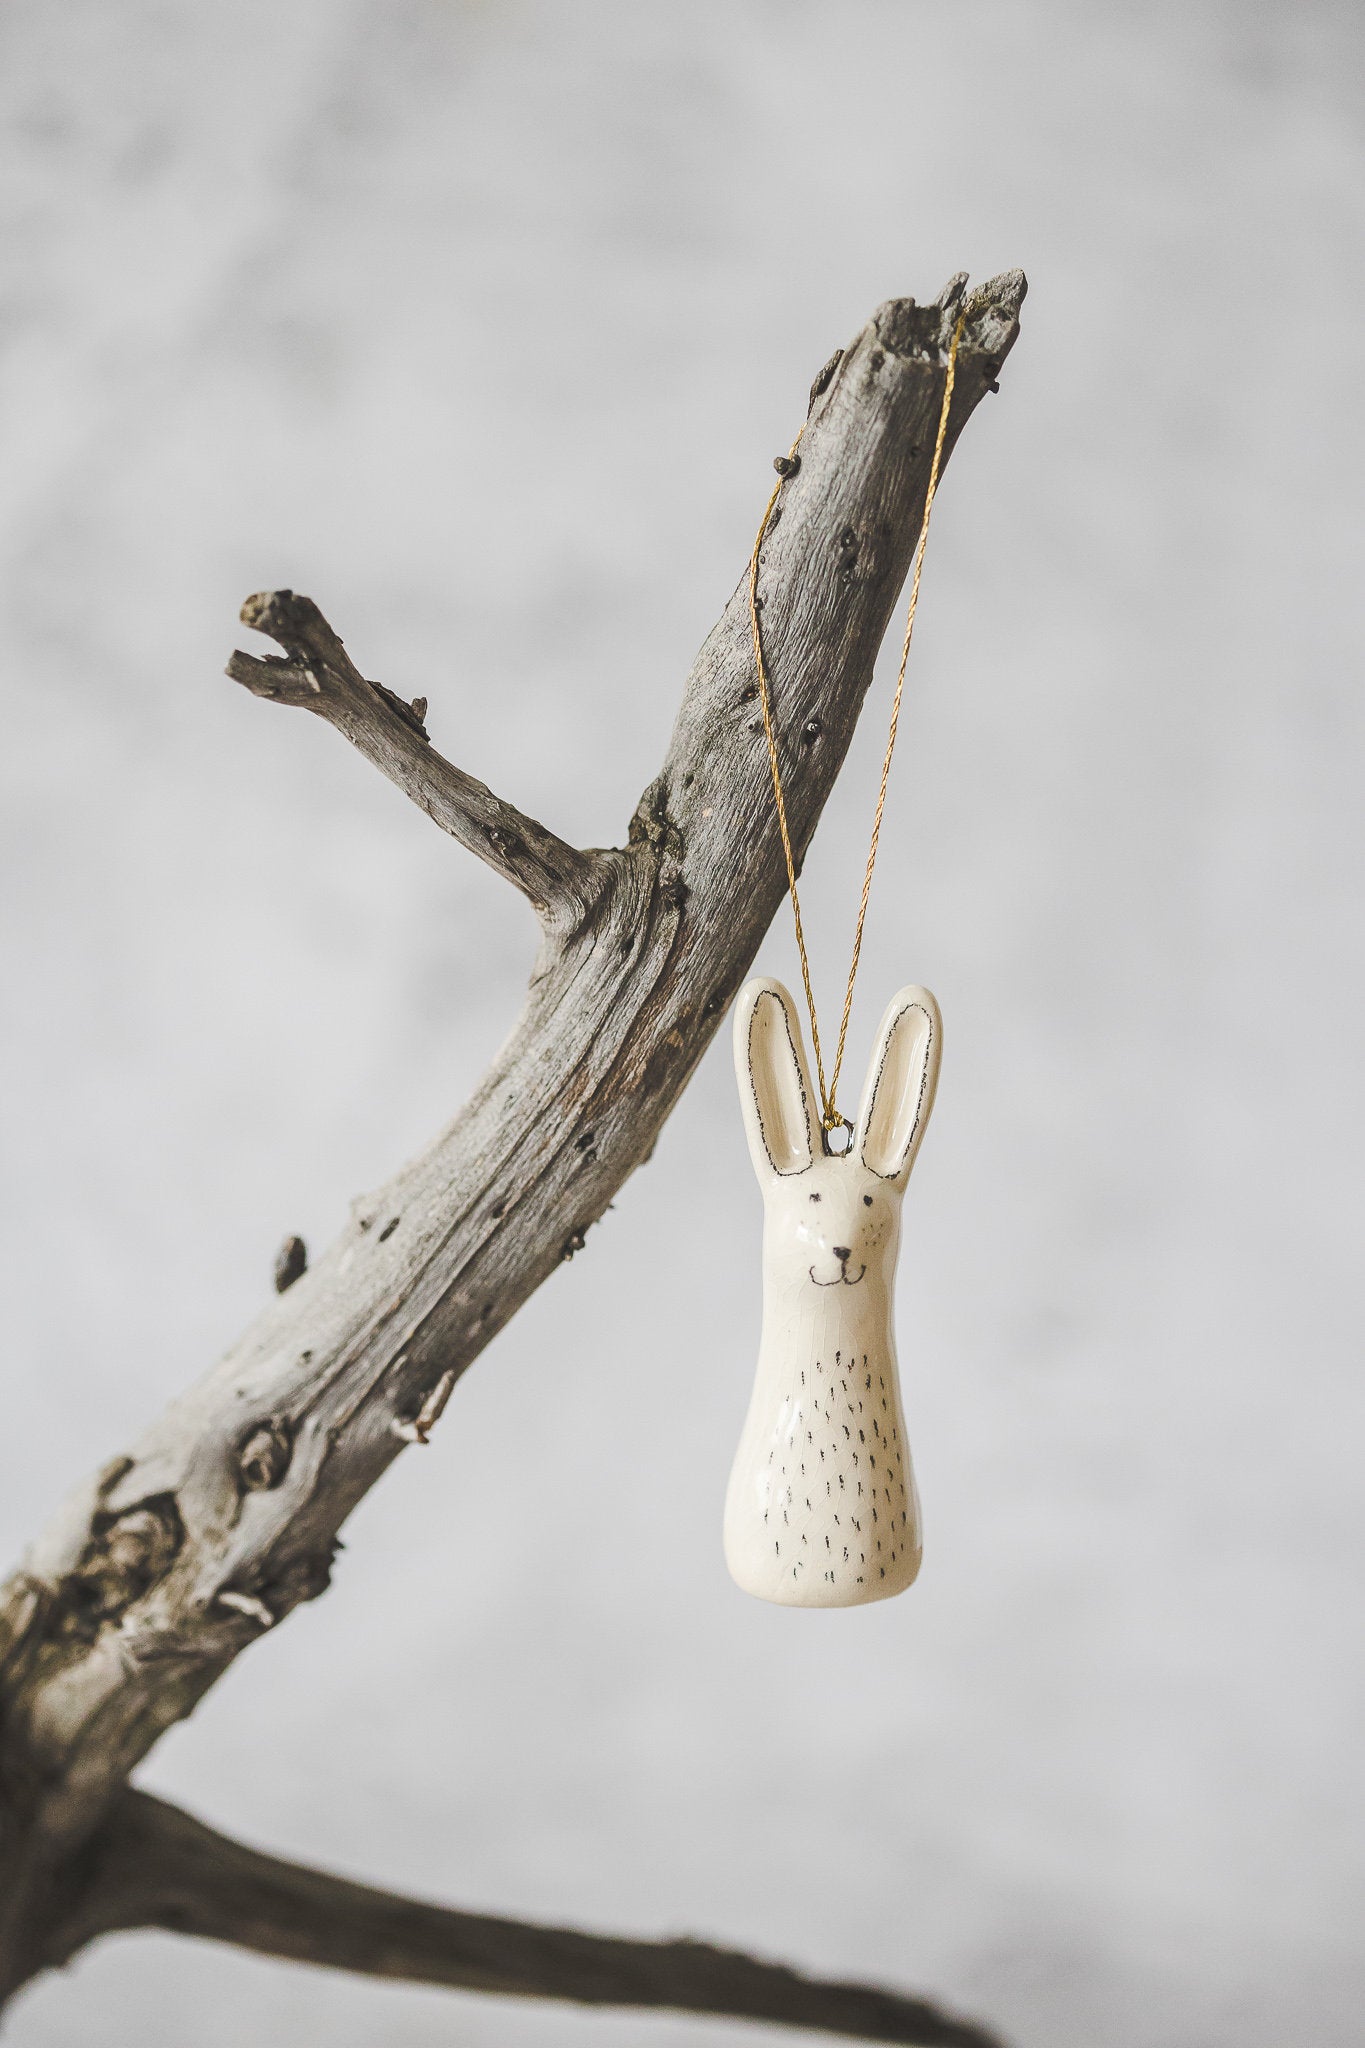 Ceramic woodland hare Christmas tree decoration - Hand painted wild hare sculpture Christmas ornament gift